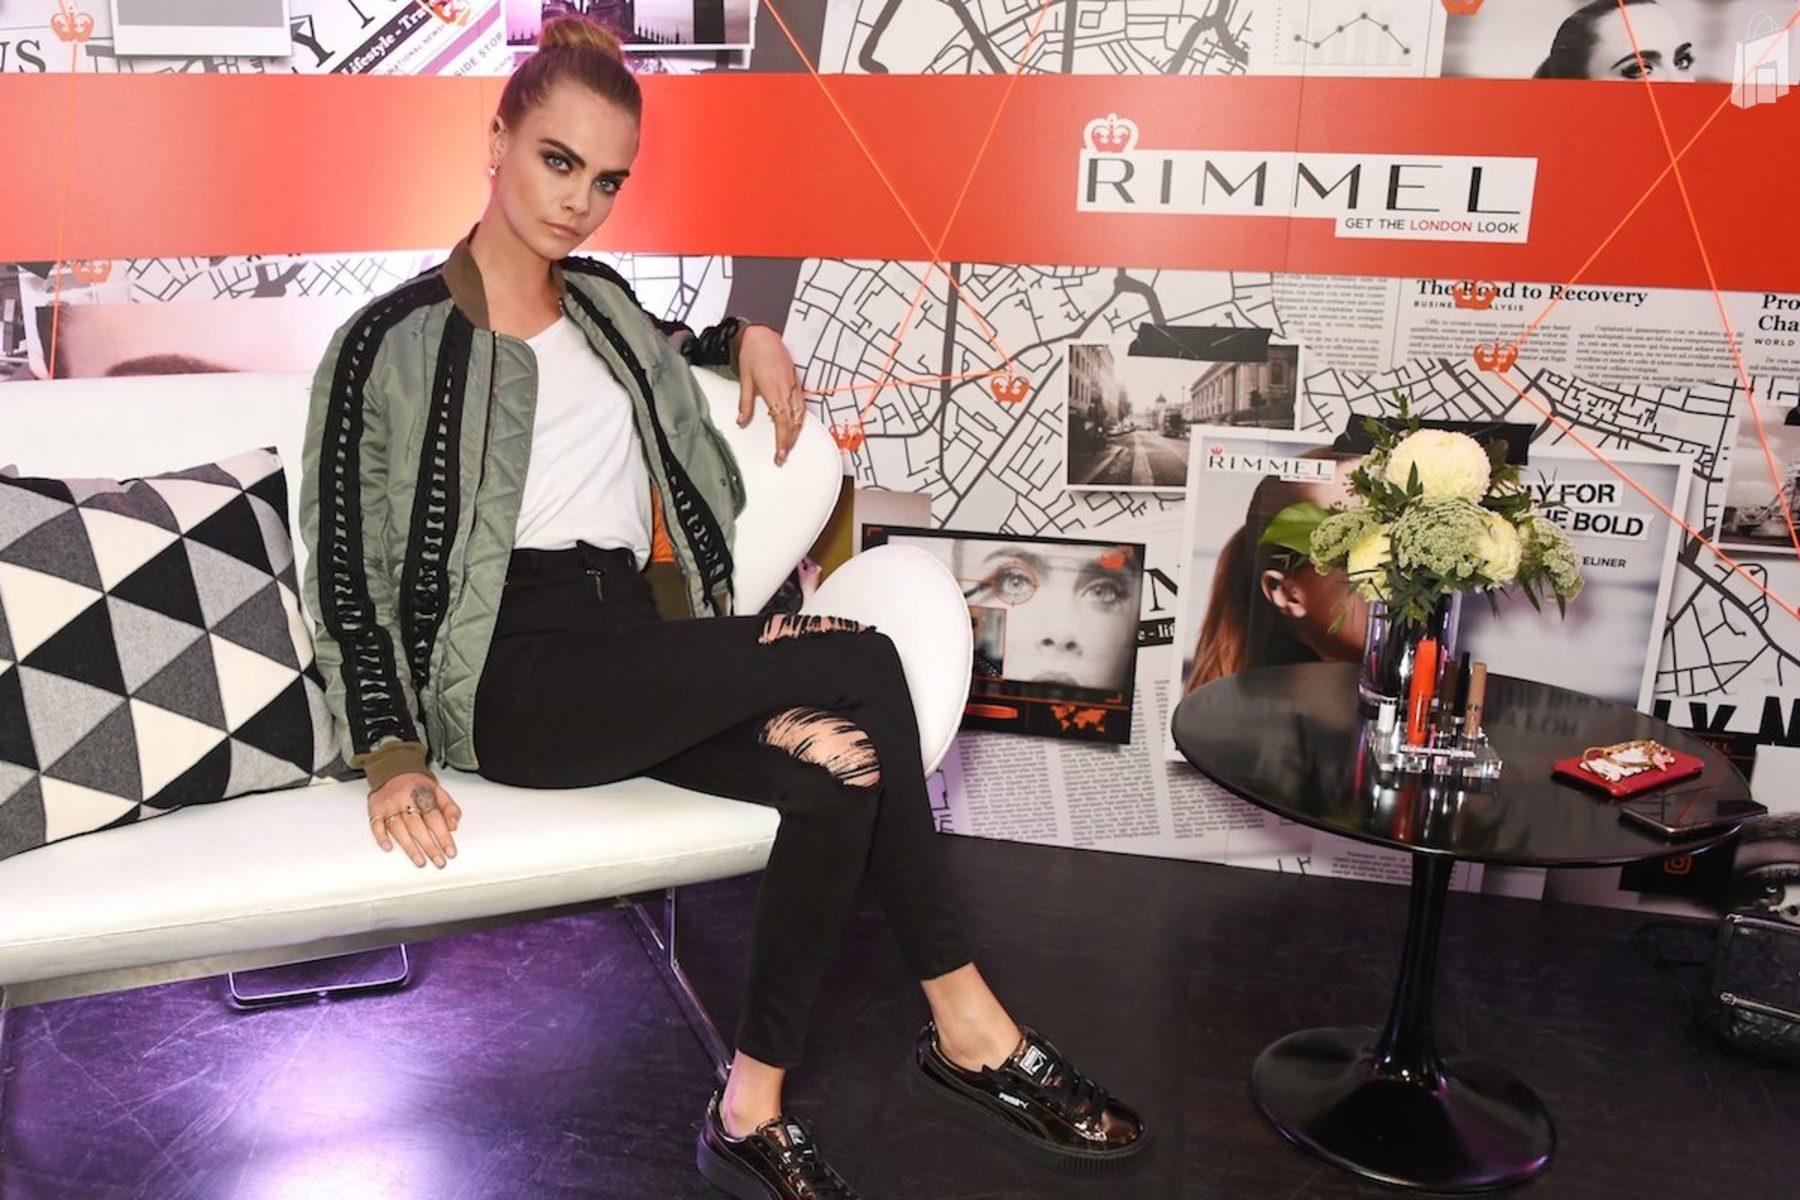 Rimmel product launch with Cara Delevingne